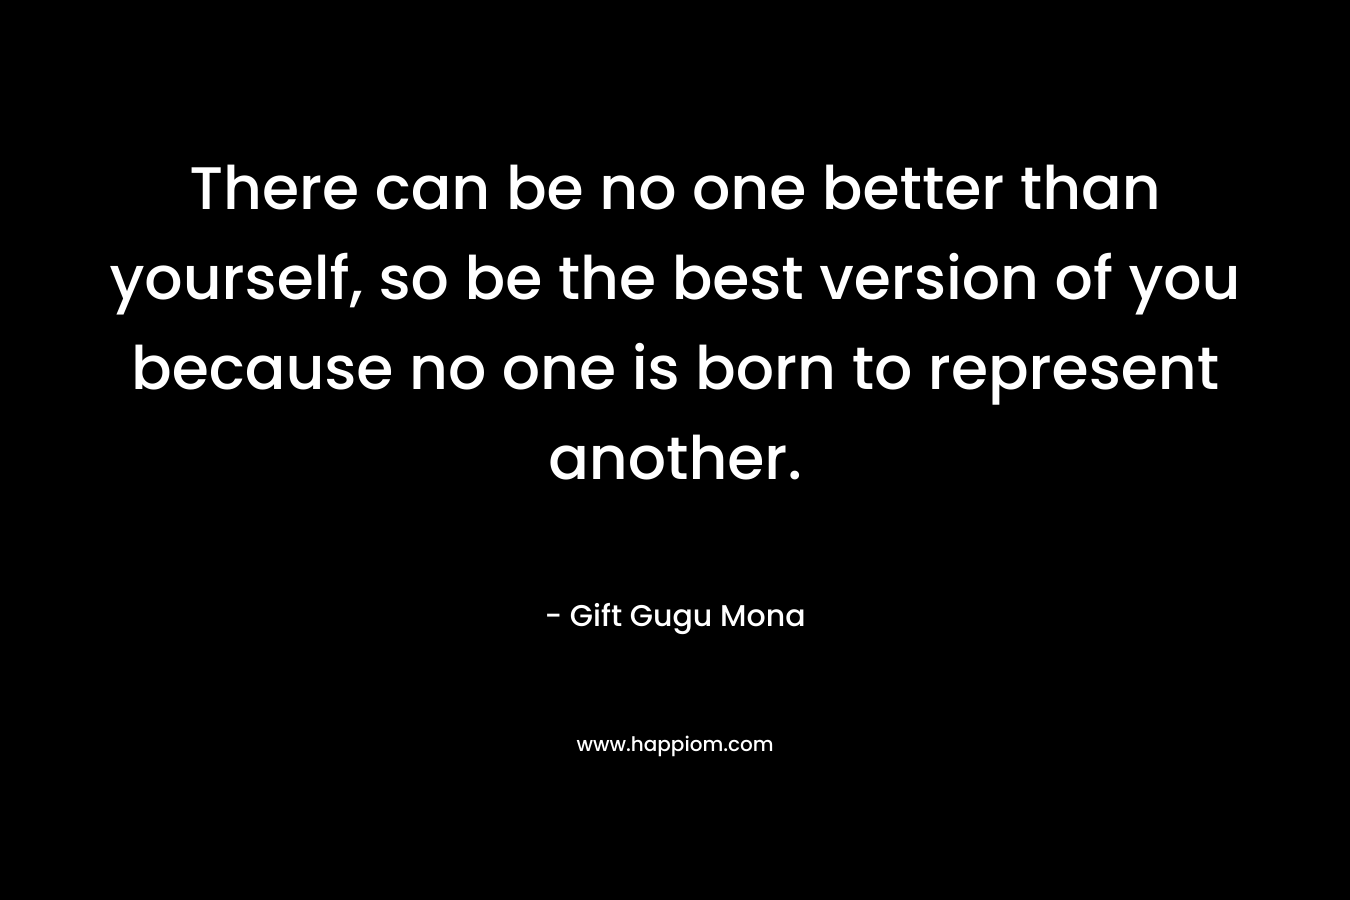 There can be no one better than yourself, so be the best version of you because no one is born to represent another.